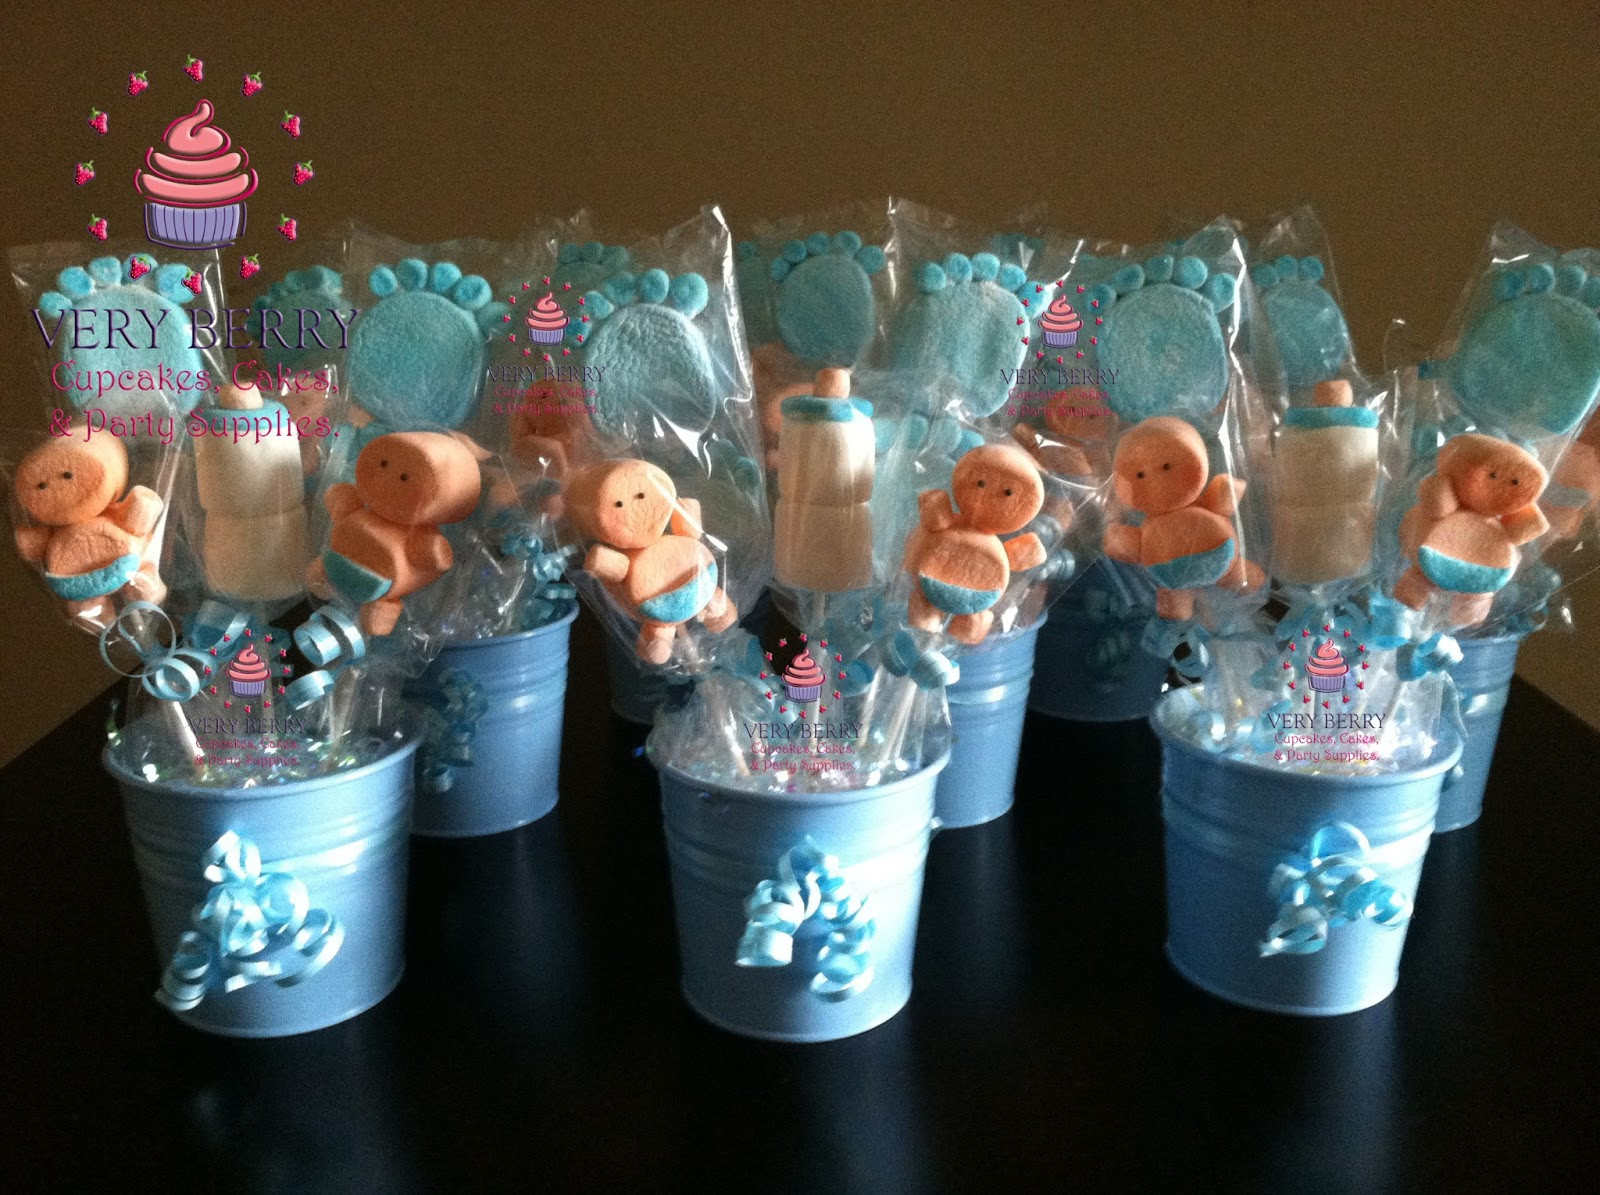 DIY Baby Shower Centerpieces For Boy
 Veryberry Cupcakes BOY BABY SHOWER MARSHMALLOW CENTERPIECES